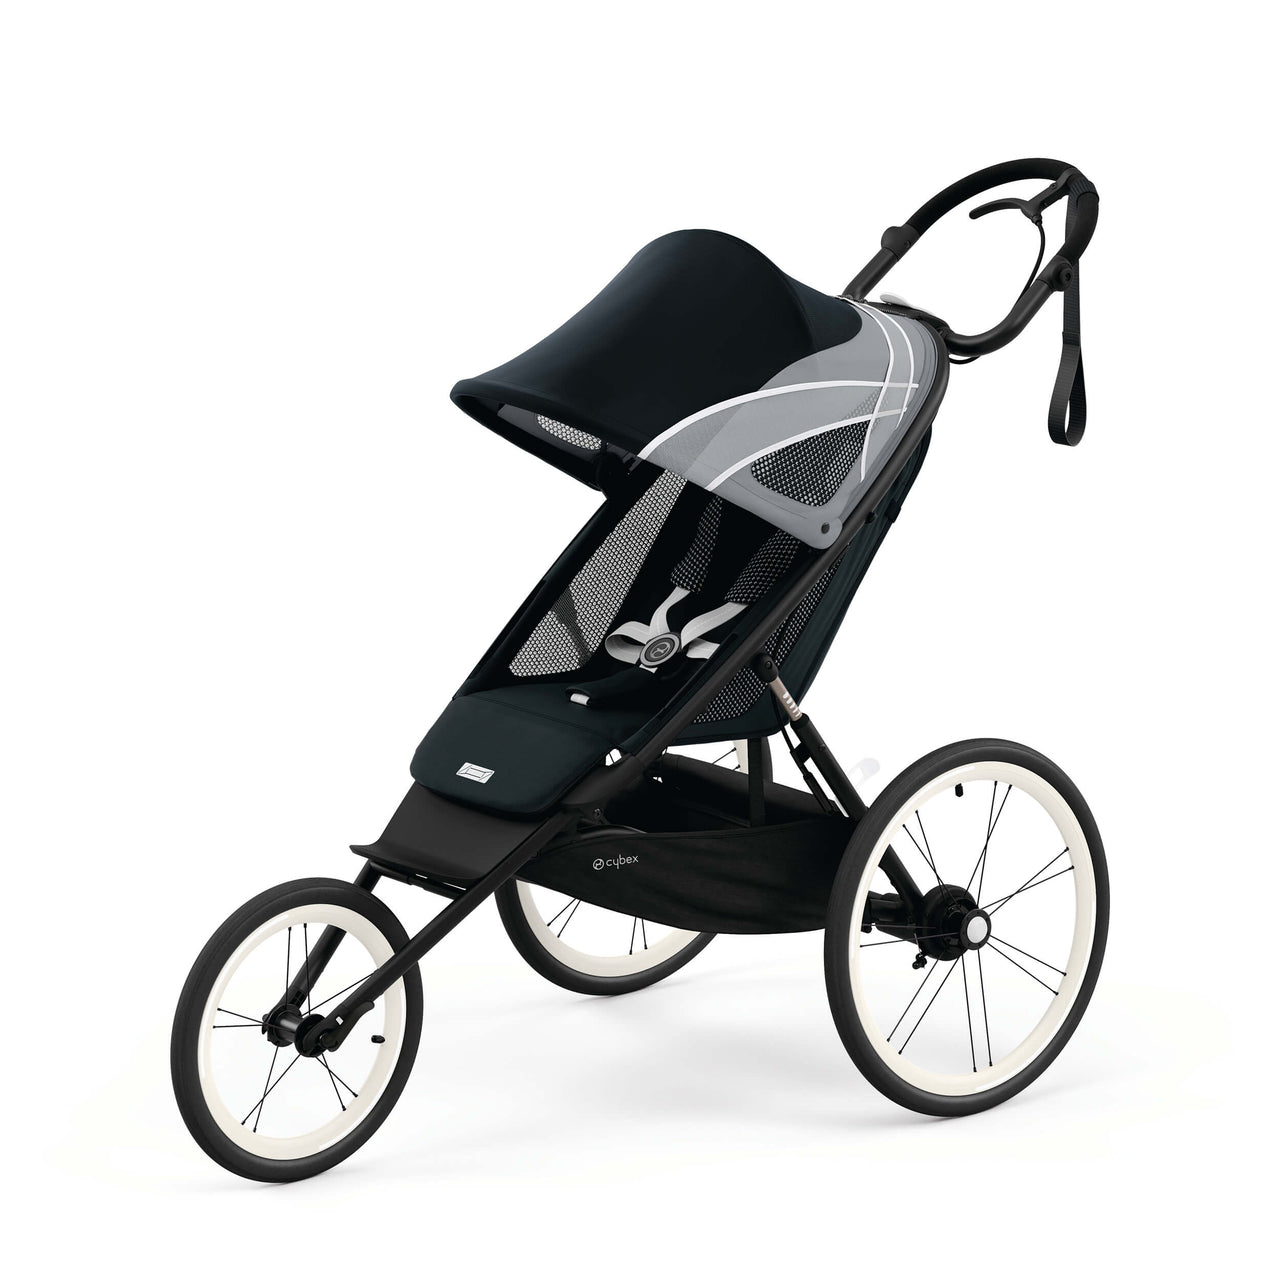 CYBEX AVI Jogging Sports Running Stroller with Seat Pack in All Black Cybex